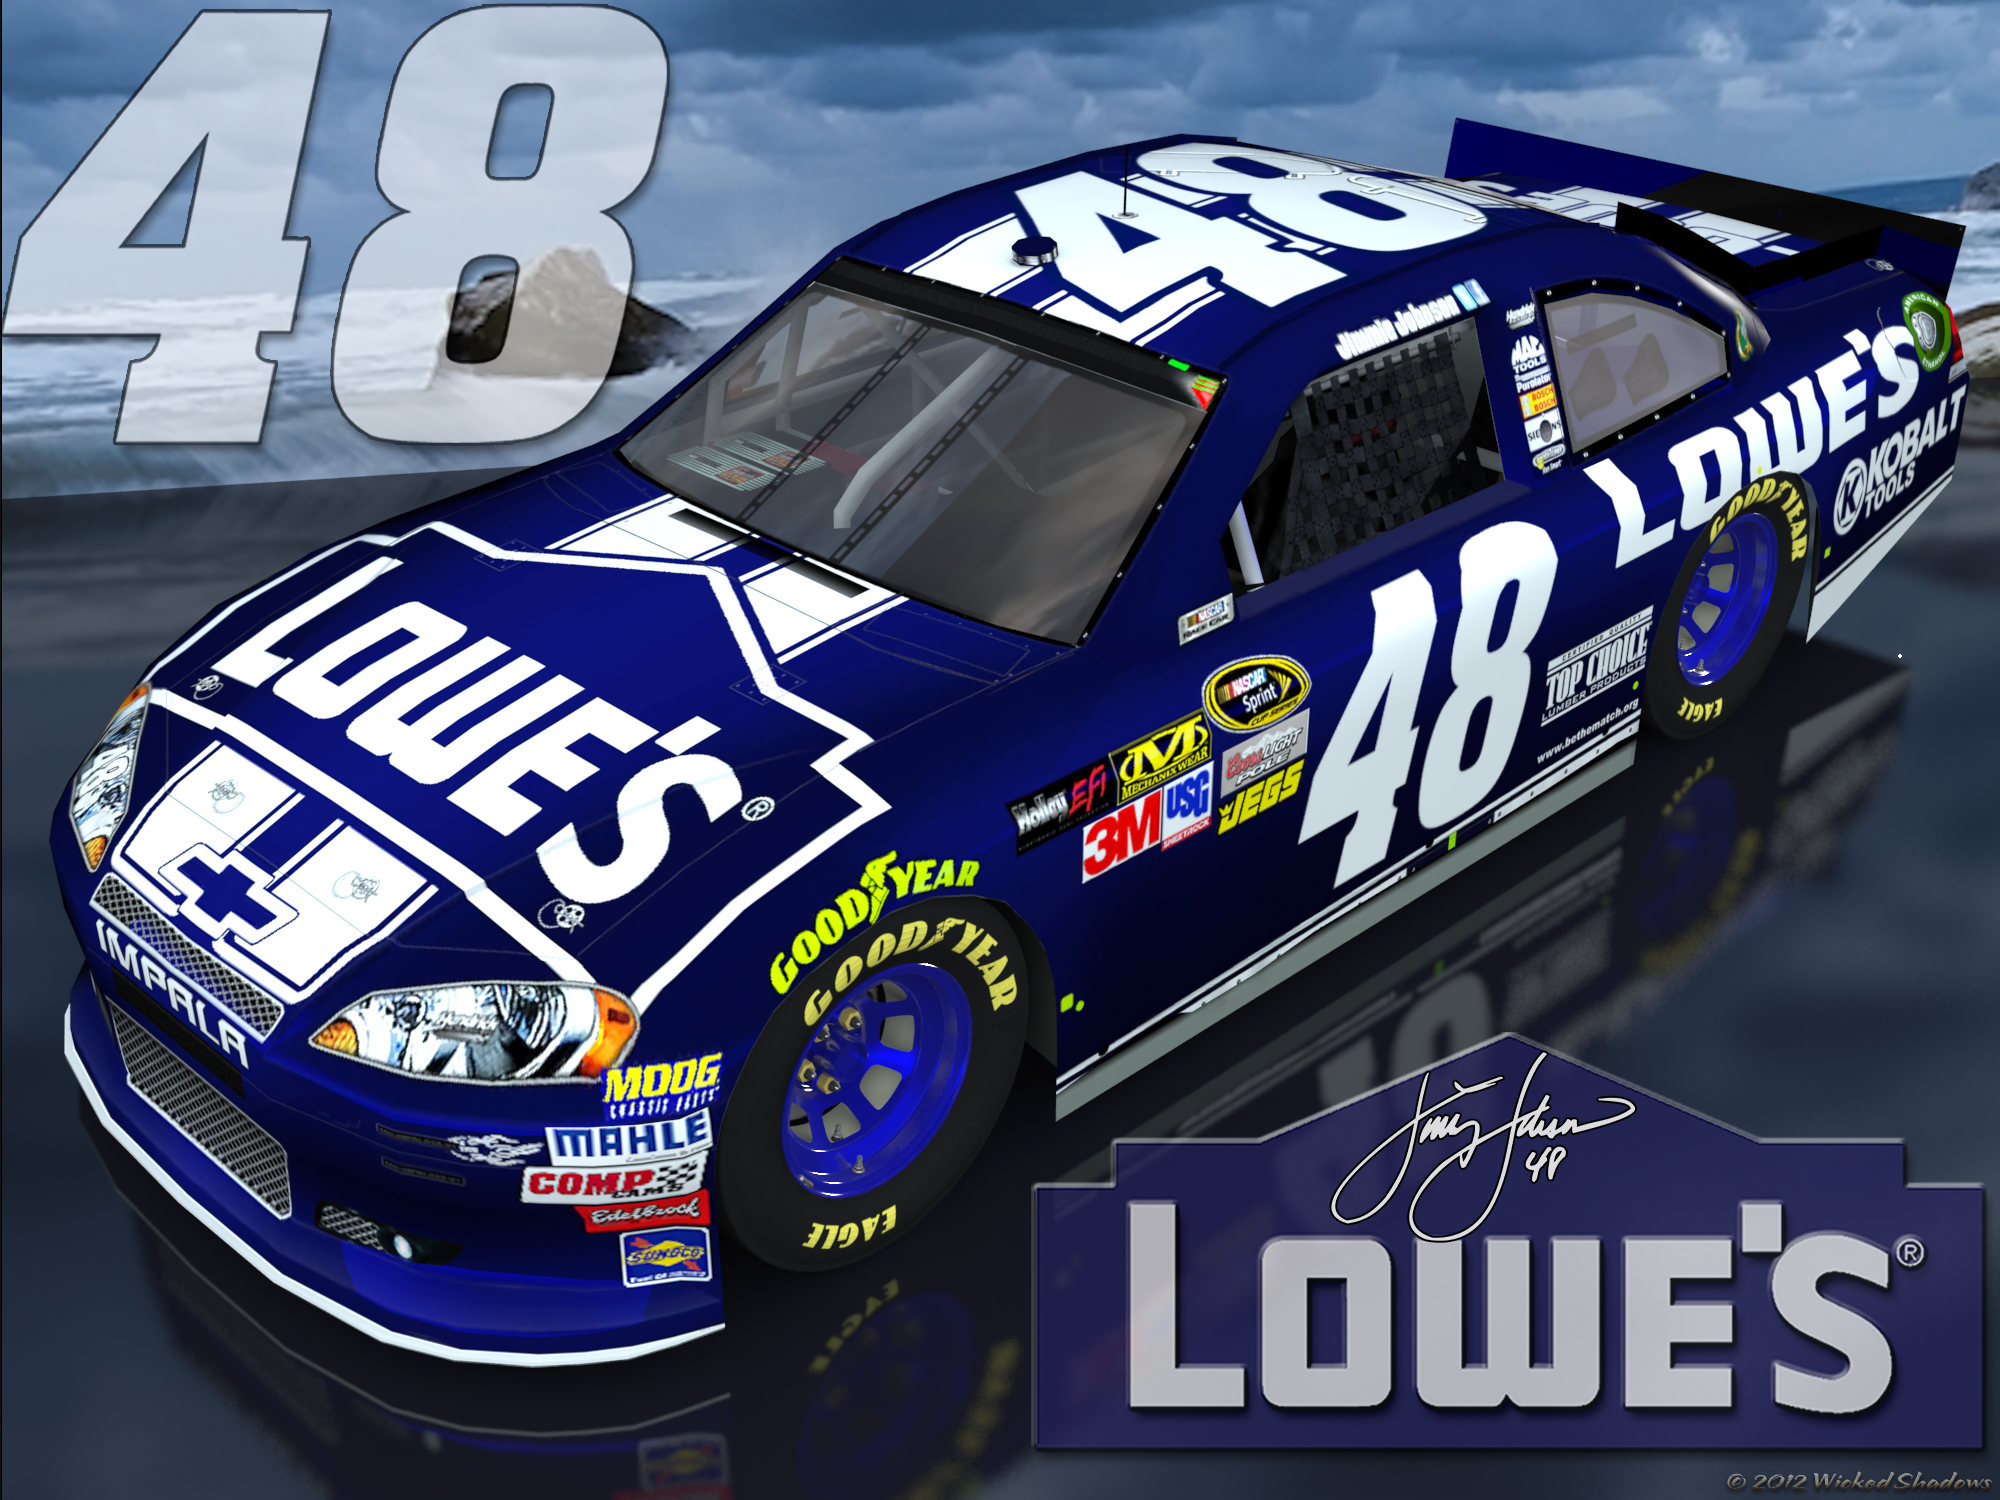 Wallpaper By Wicked Shadows Jimmie Johnson Lowes Brighter Outdoor